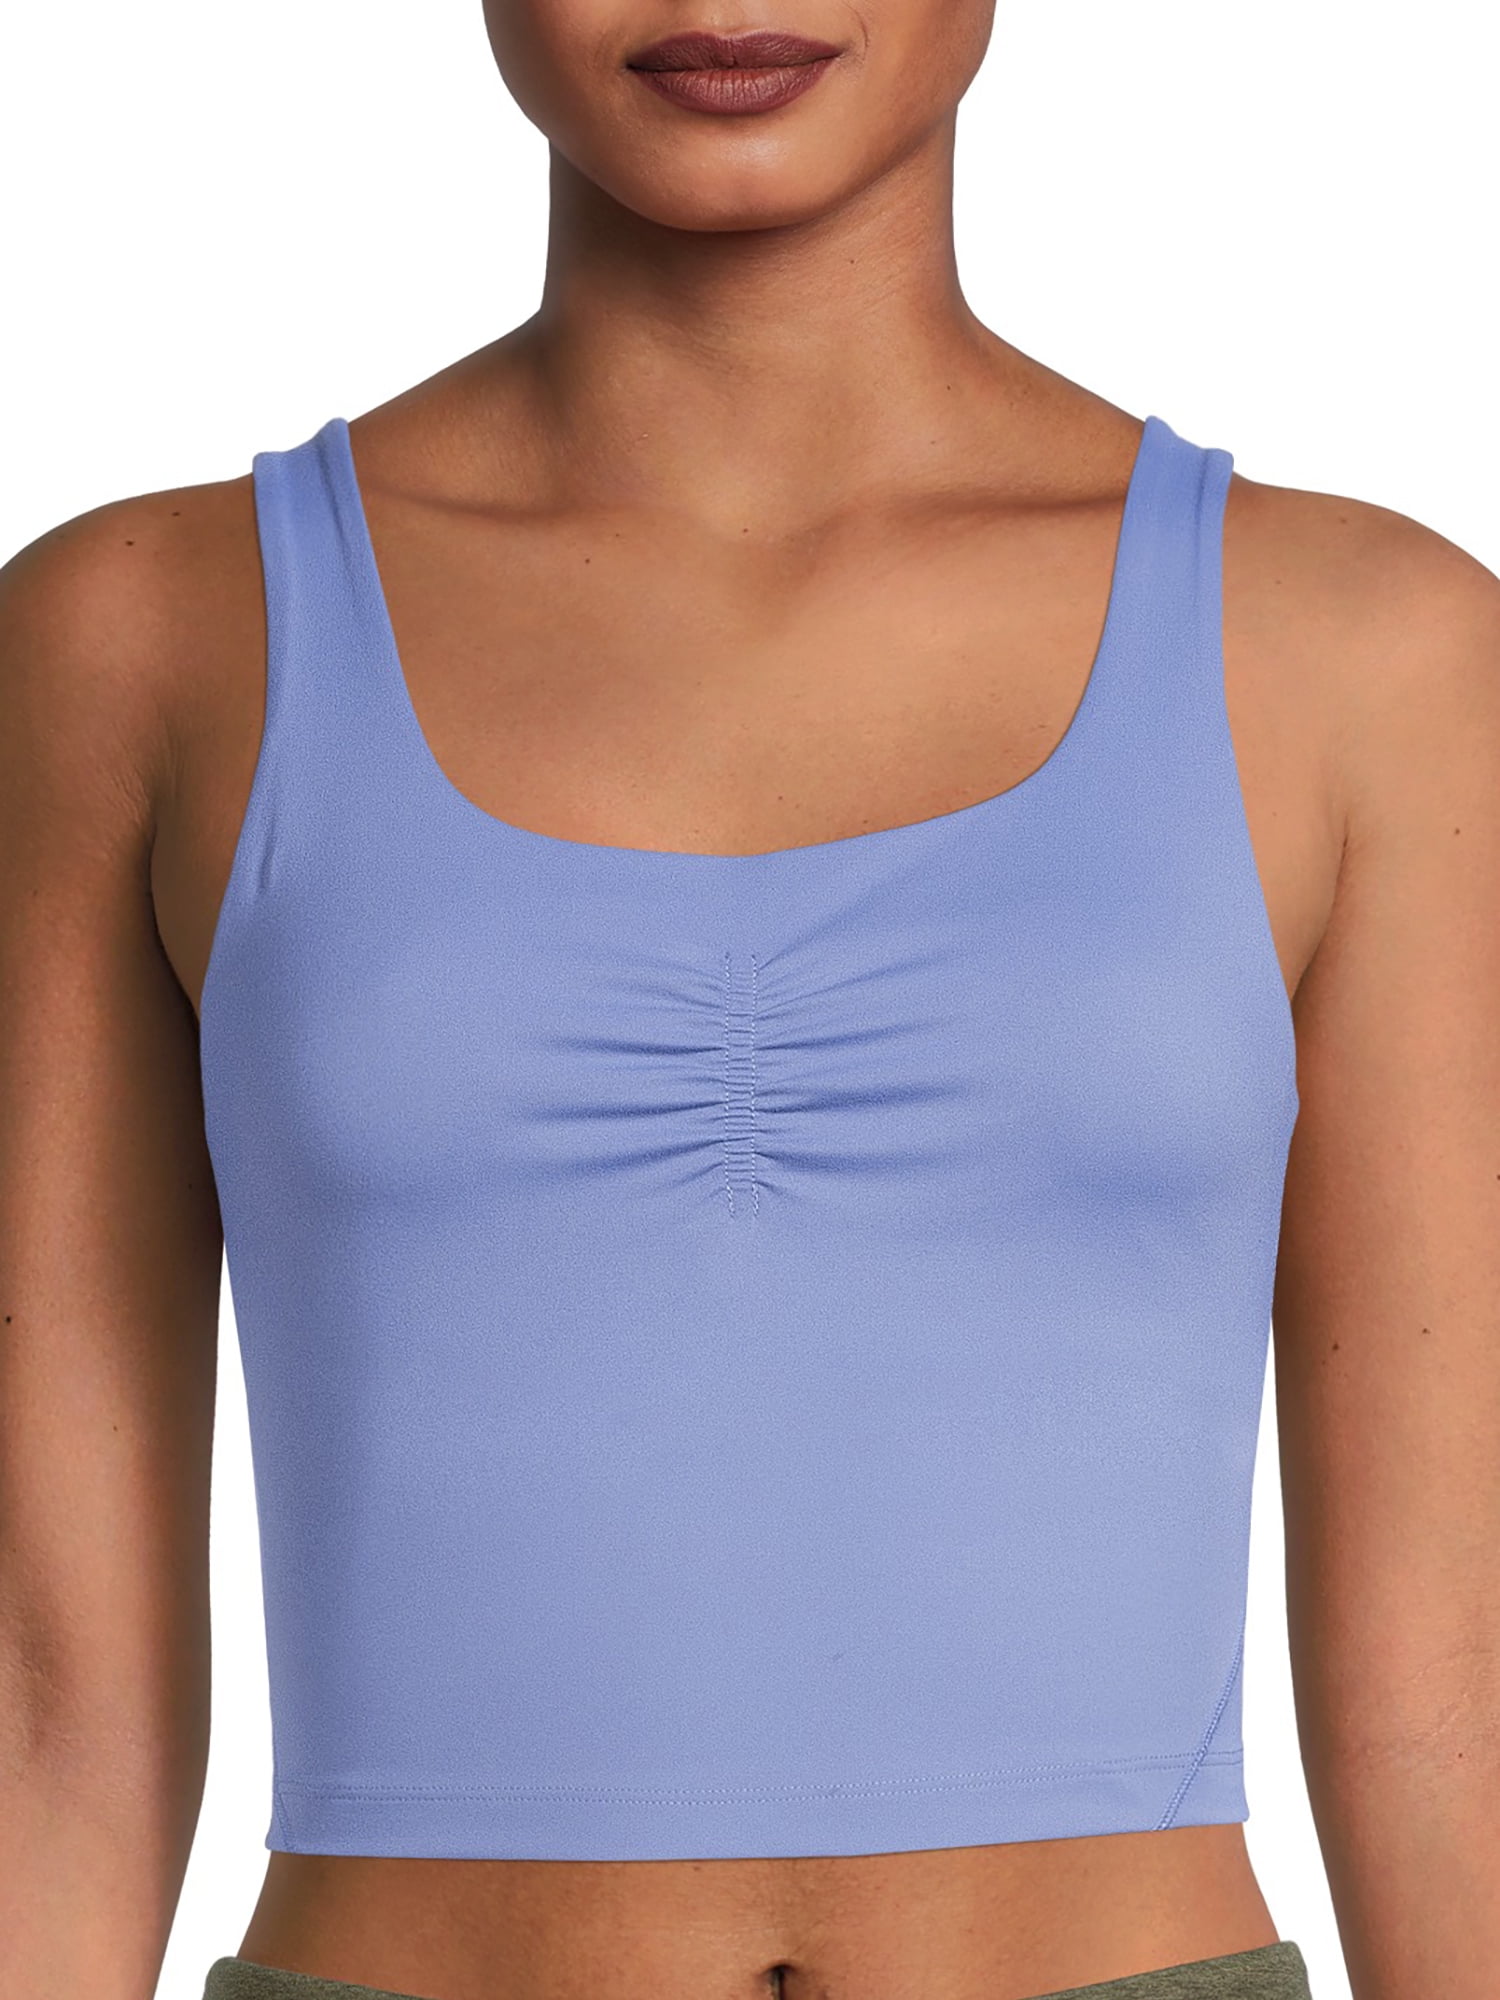 Buy Avia Womens Ruched Front Sport Crop Top at Ubuy Nepal